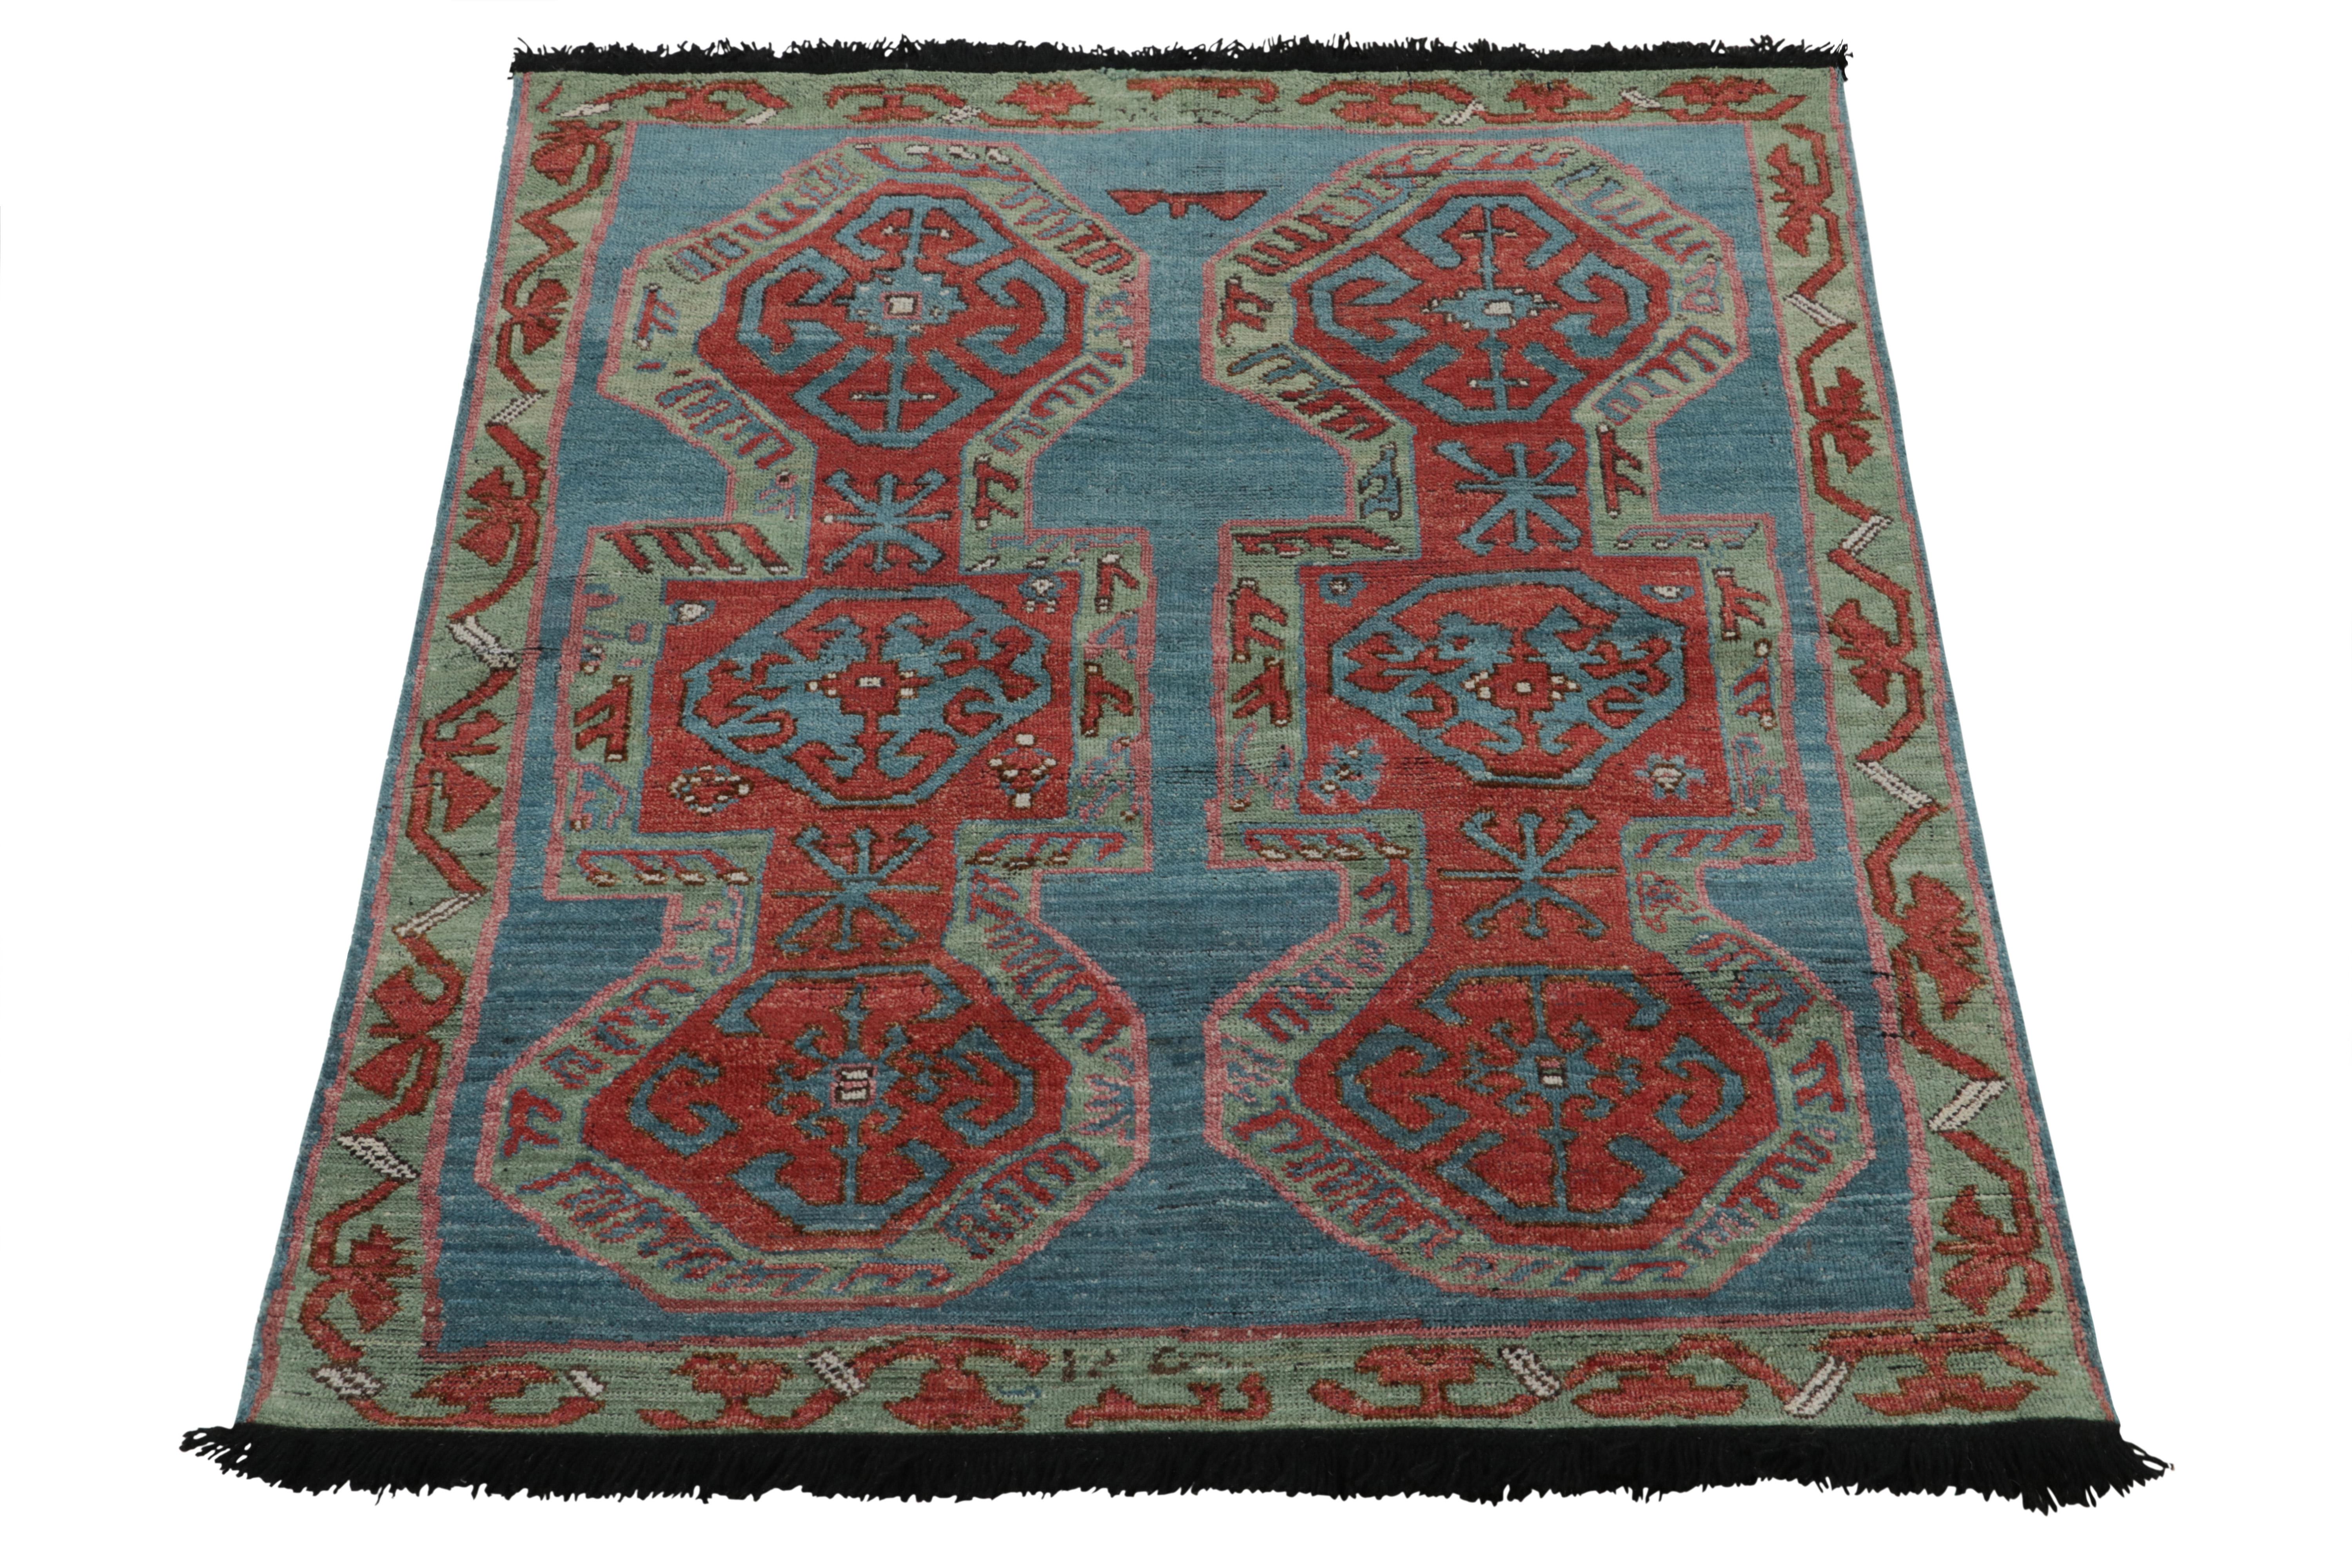 Hand-knotted in fine wool, this 4x5 rug from our Burano Collection reflects upon and recaptures the raw appeal of indigenous designs. The tribal personality of the piece enjoys a rich traditional pattern in deep red sitting boldly on blue-green hues